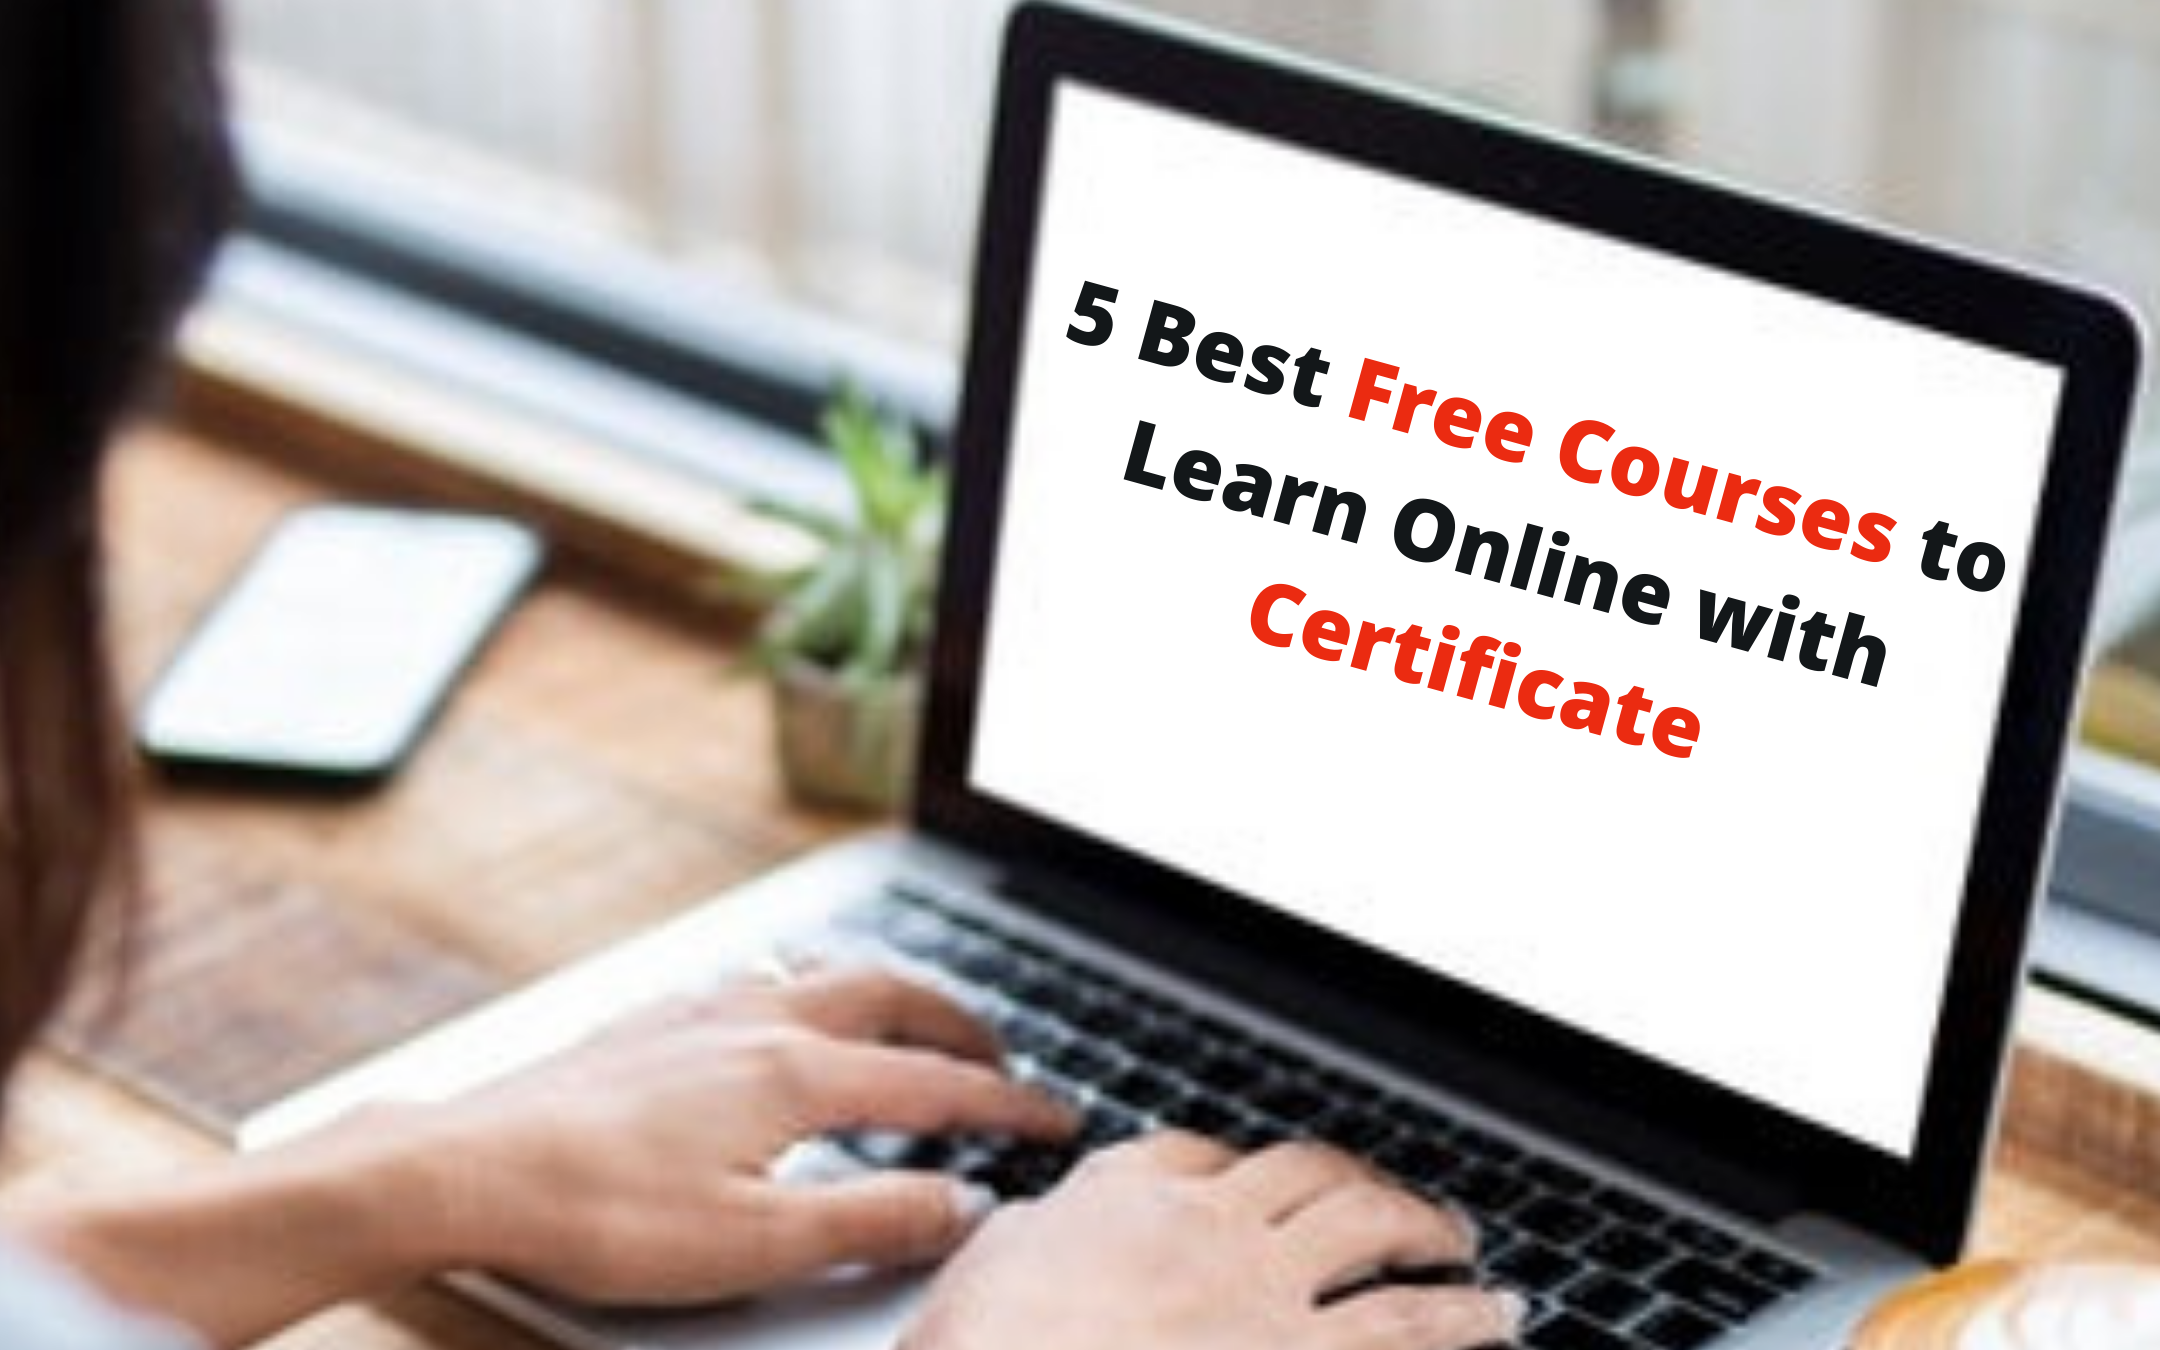 5 Best Free Courses to Learn Online with Certificate